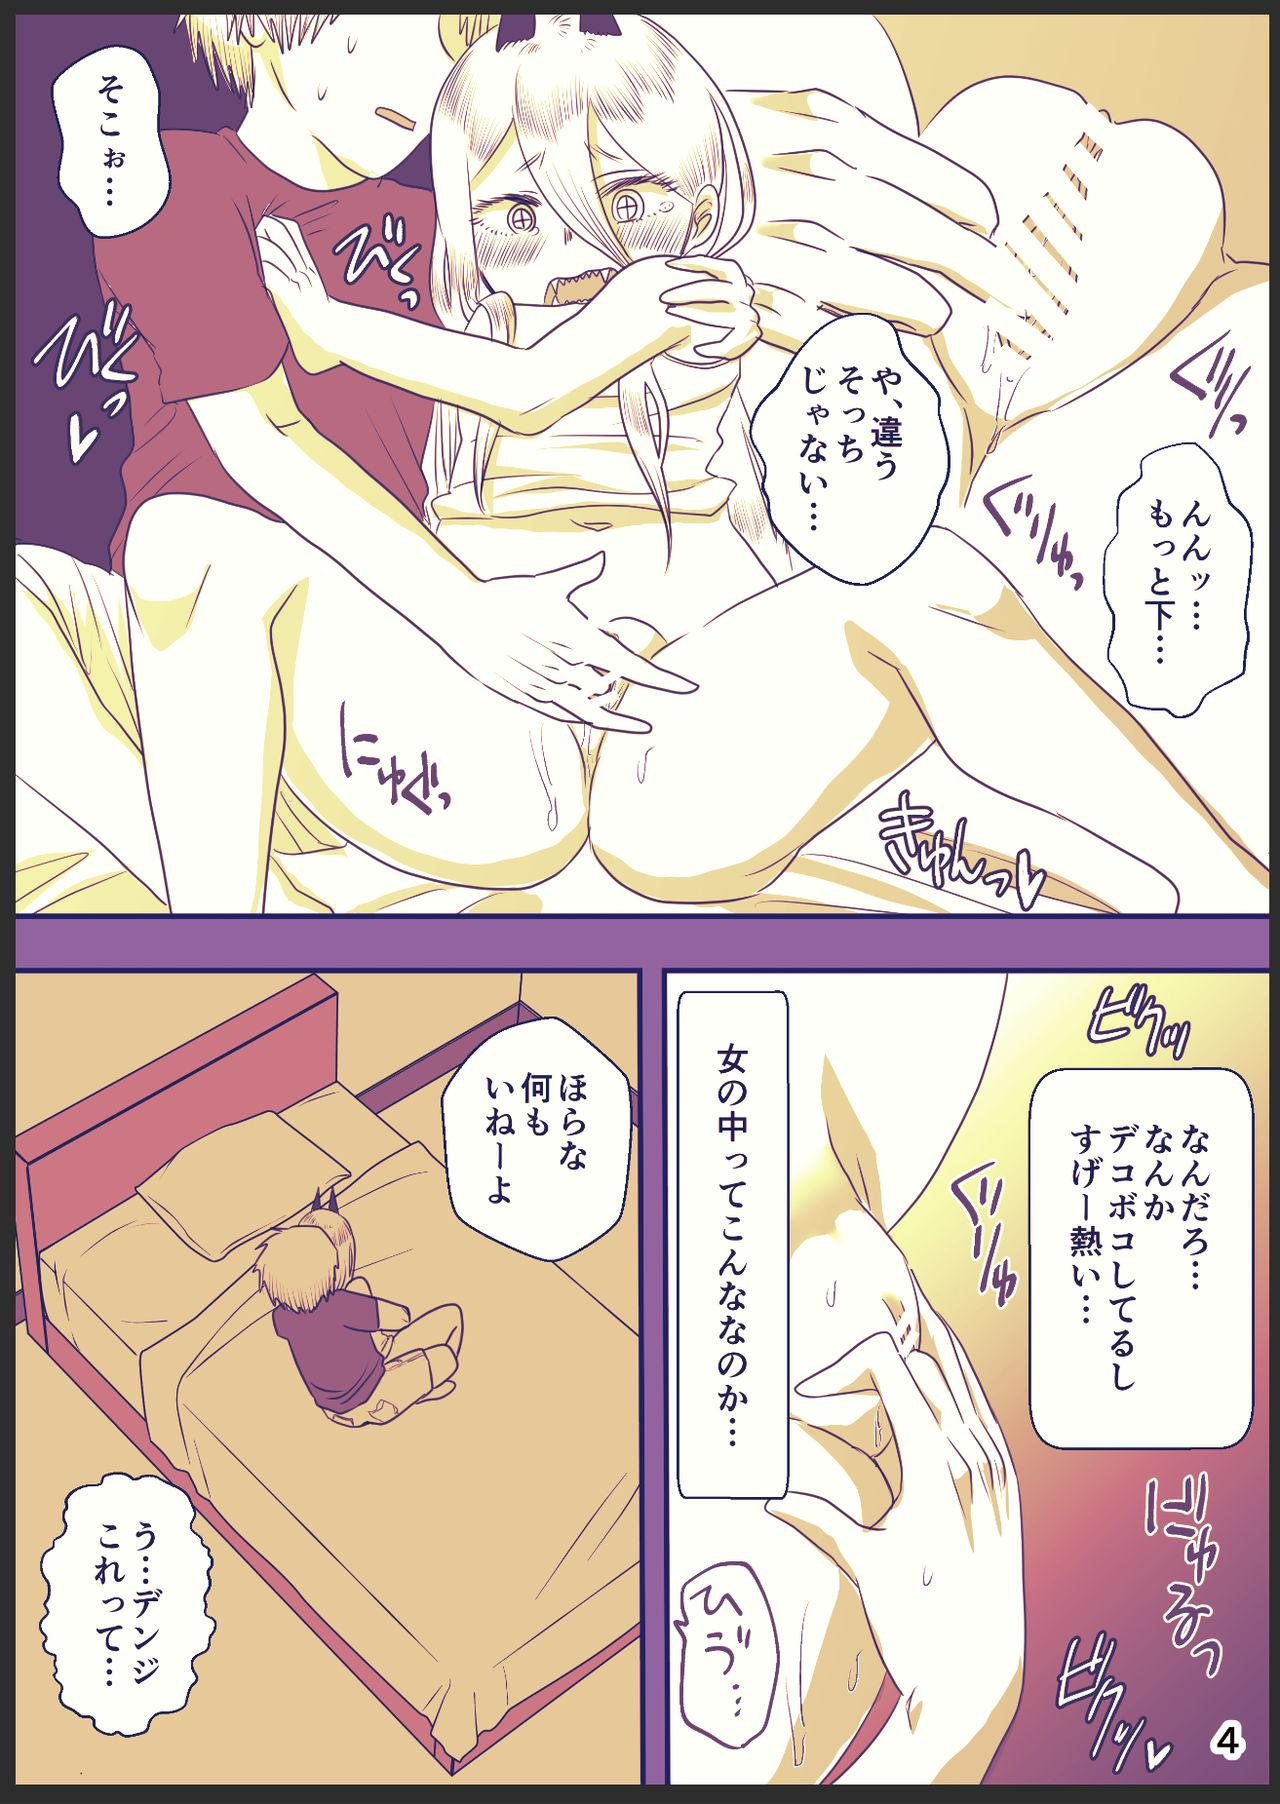 Girl Sucking Dick 71話のデンパワ漫画 - Chainsaw man Masseuse - Page 4